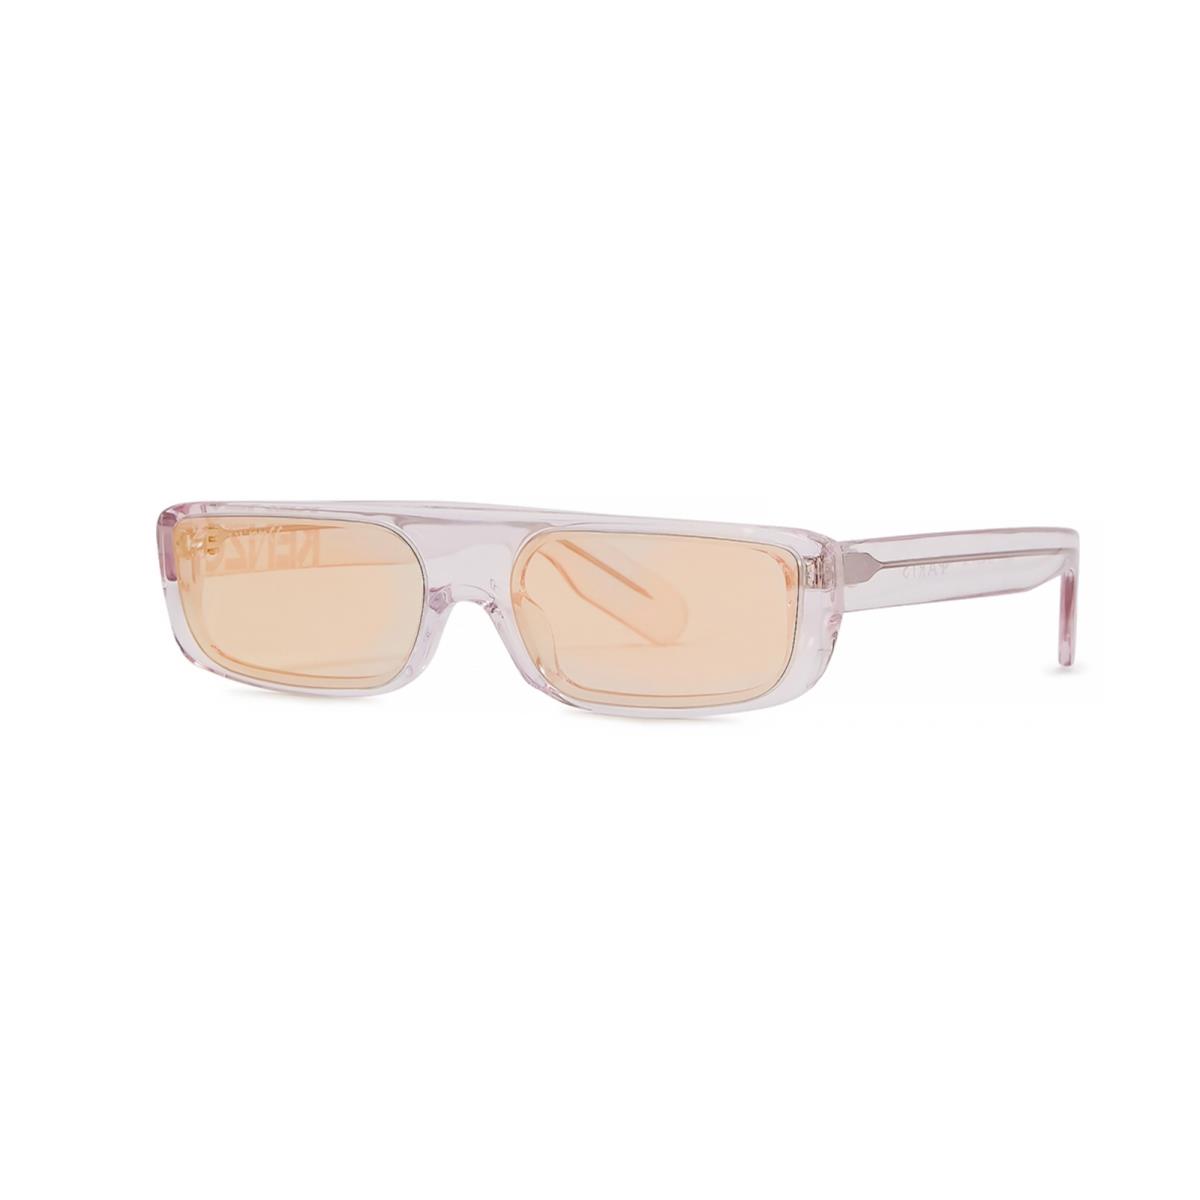 Kenzo Woman`s Pink 60mm Rectangle Frame Sunglasses S3934